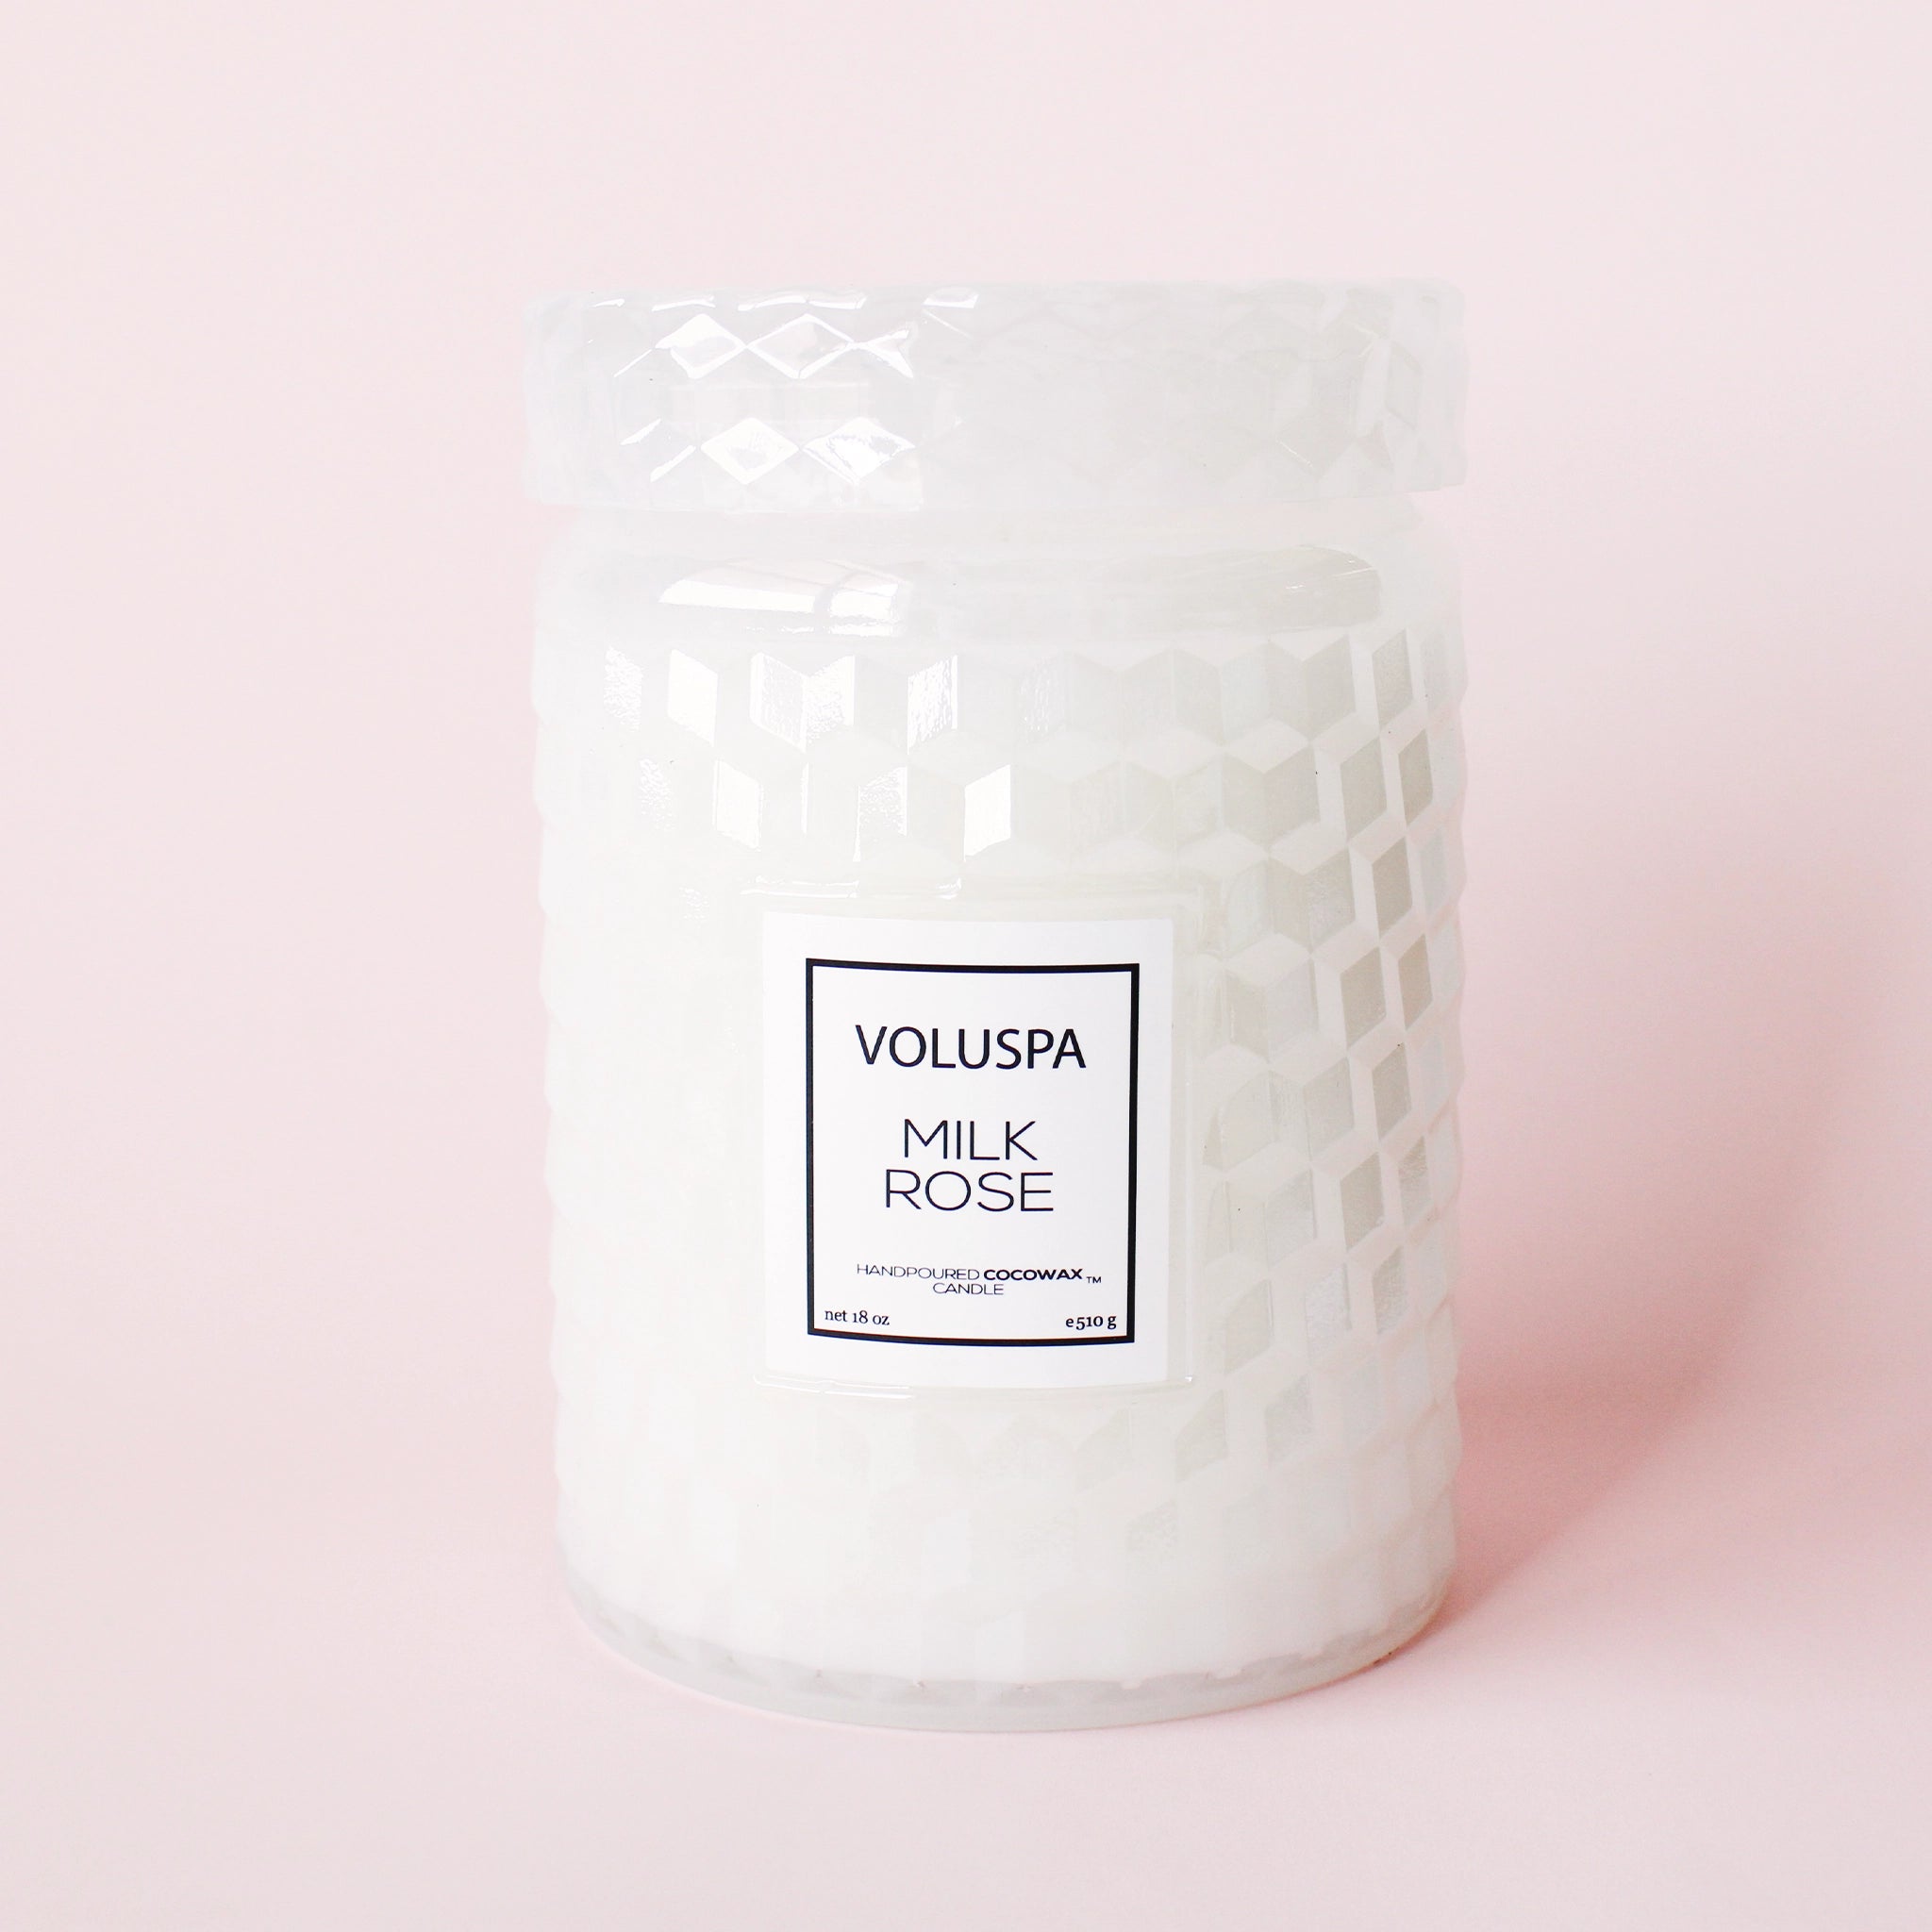 On a light pink background is a white glass jar candle with a milky effect to the glass along with a lid and a rectangular label in the center that reads, "Voluspa Milk Rose".